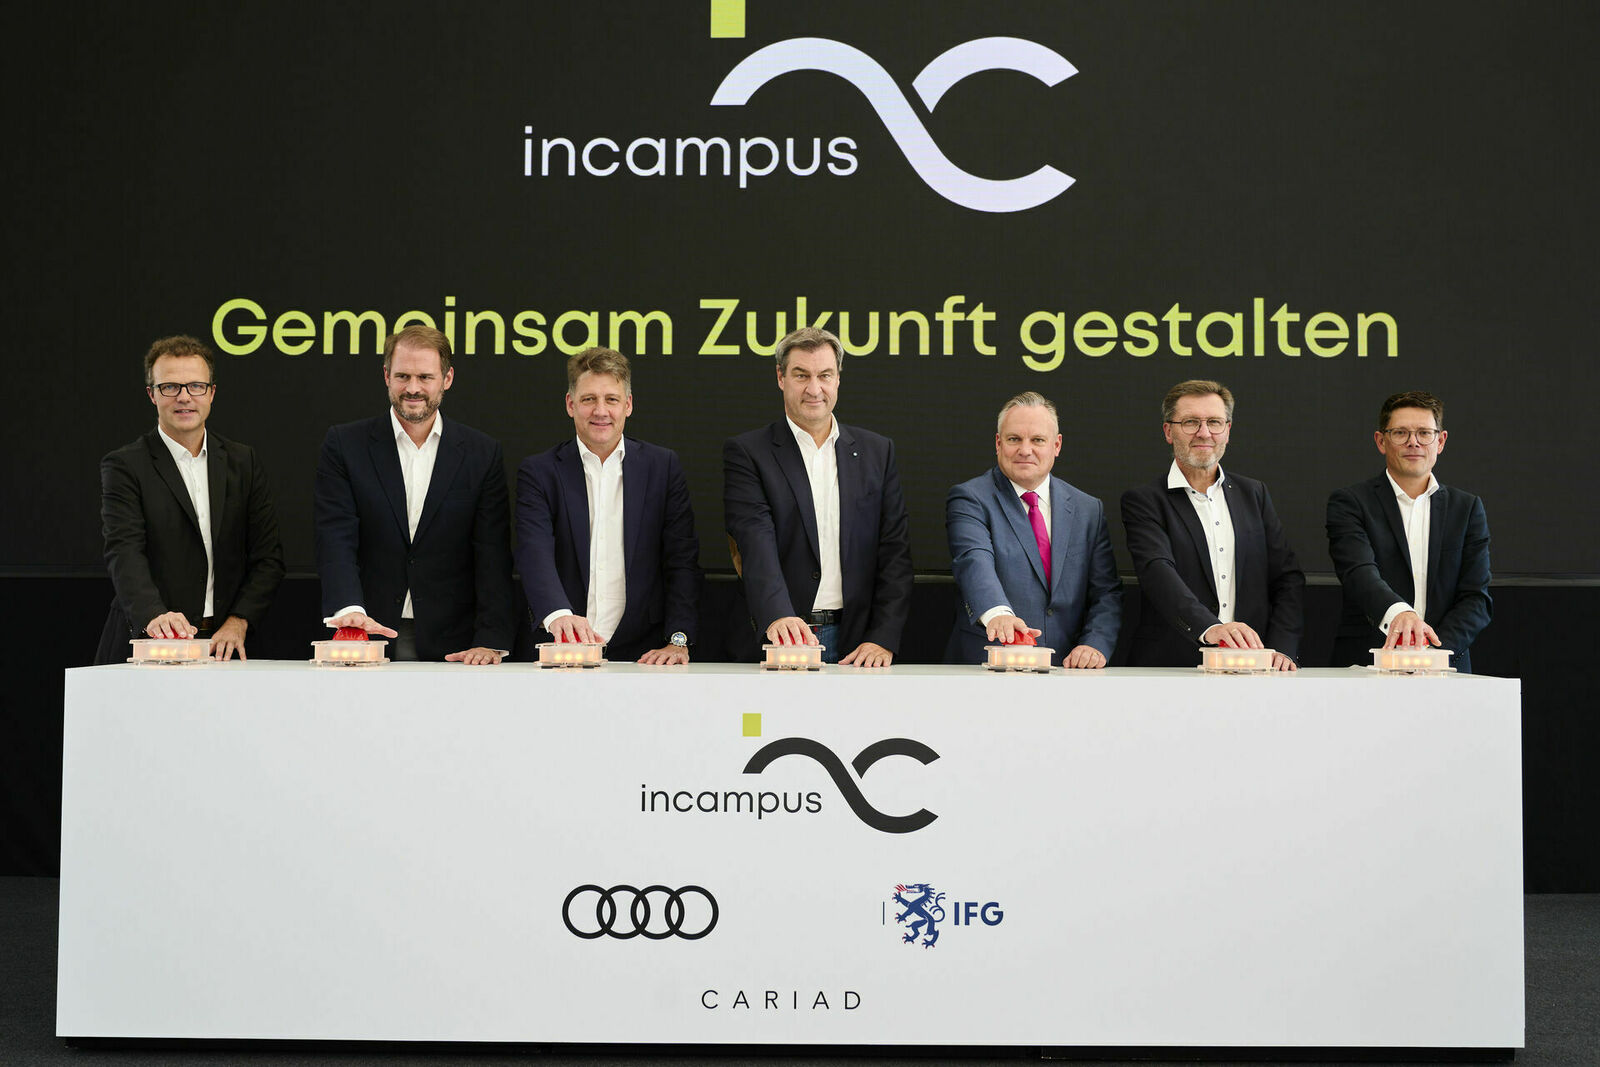 A picture of Christof Messner, Managing Director of IN-Campus GmbH and Audi Events and Services GmbH; Peter Bosch, CEO of CARIAD; Gernot Döllner, Chairman of the Board of Management of AUDI AG; Markus Söder, Bavarian Minister President; Christian Scharpf, Lord Mayor of the City of Ingolstadt; Norbert Forster, Managing Director of IN-Campus GmbH and Board Member of IFG Ingolstadt AöR and Dennis Hartmann, Overall Project Manager incampus and Project Manager New Vehicle Safety Center, standing at a lectern and placing their hands on a red button.